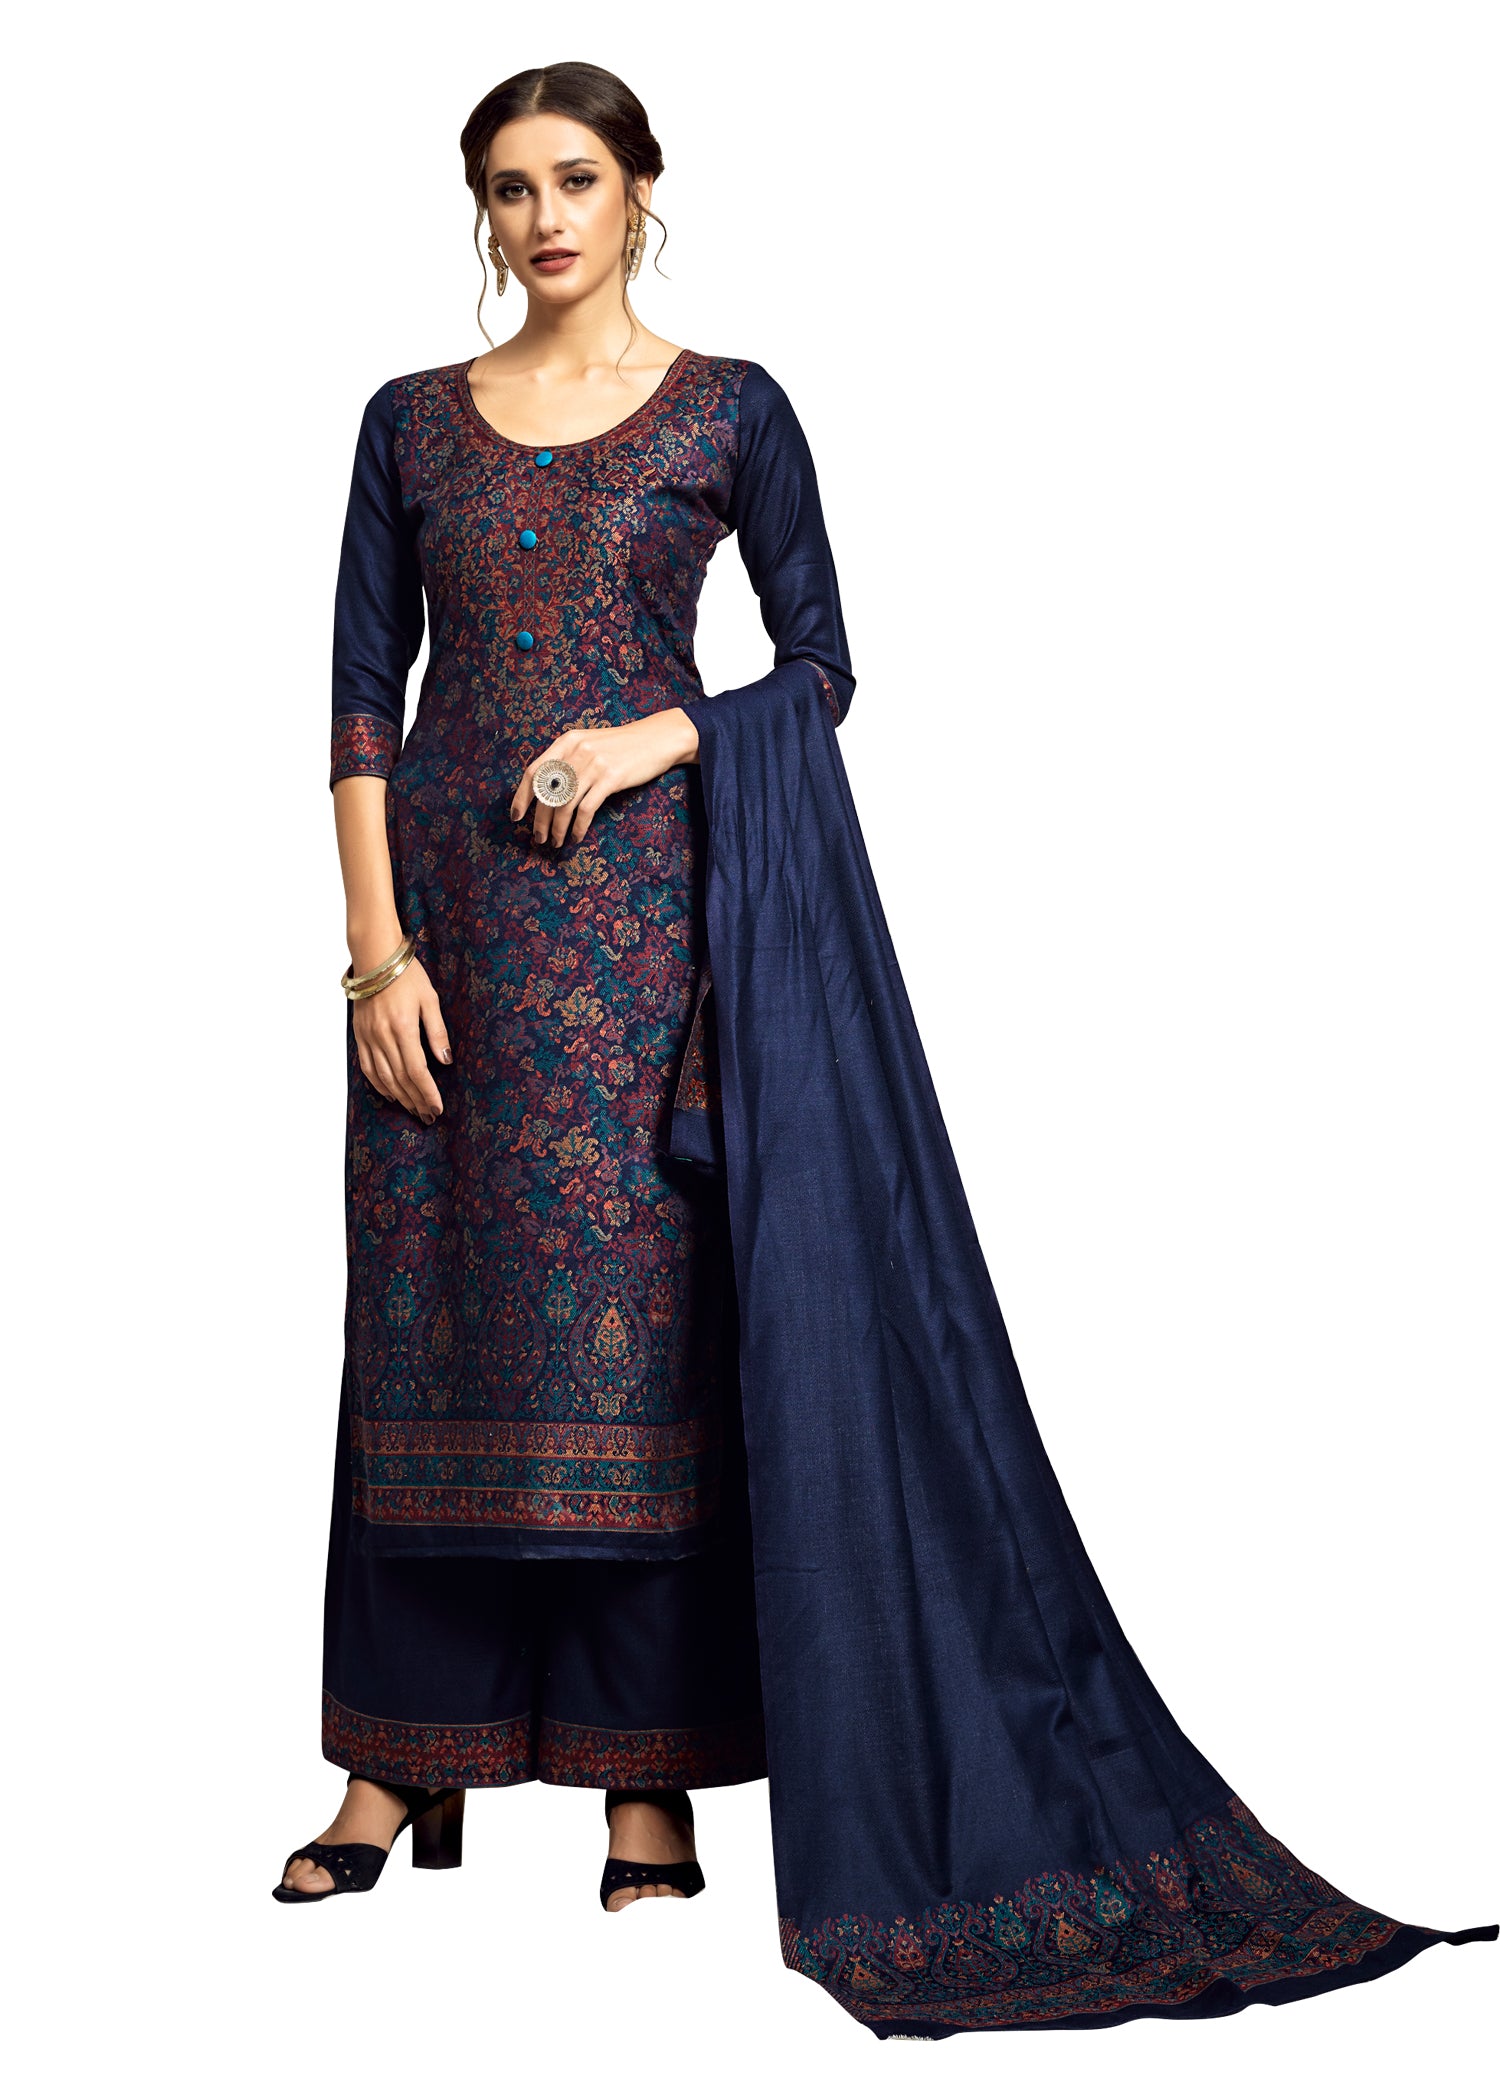 ACRO WOOL NAVY DRESS MATERIAL WITH STOLE